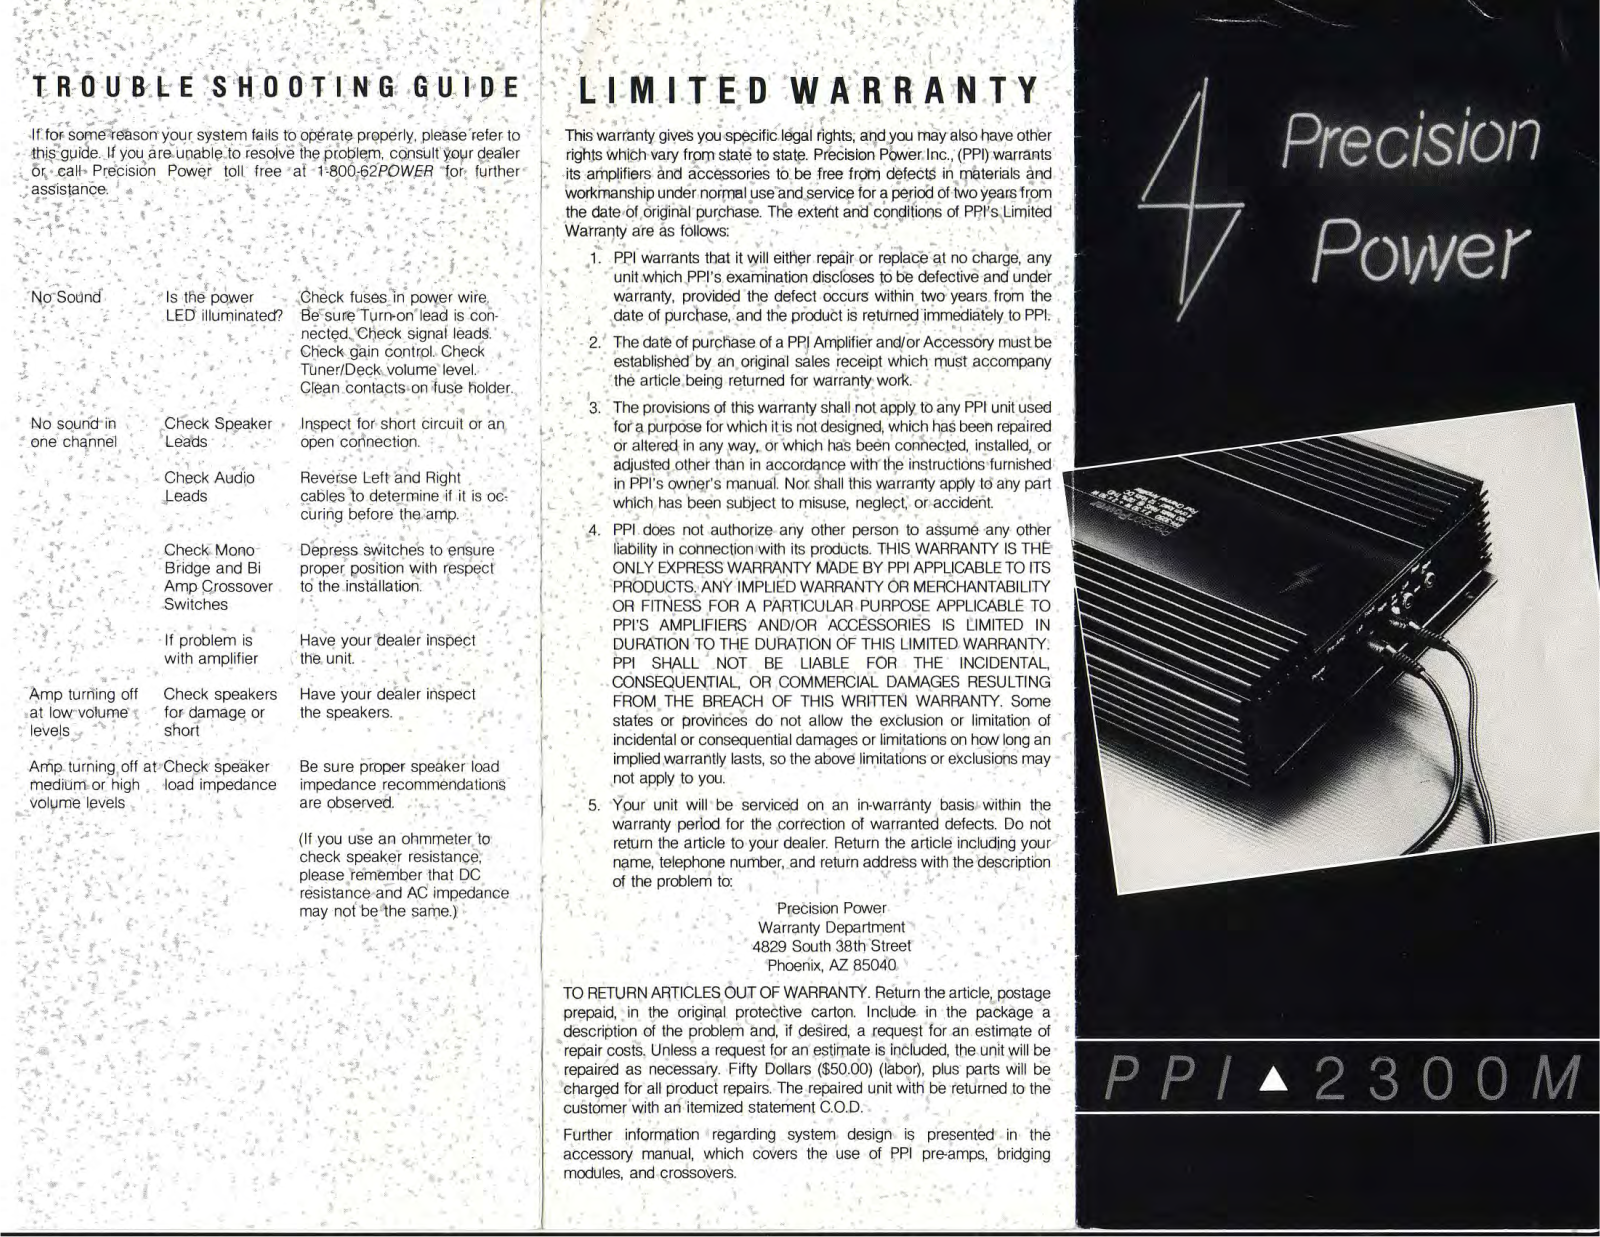 Precision Power PPI 2300M Owners Manual